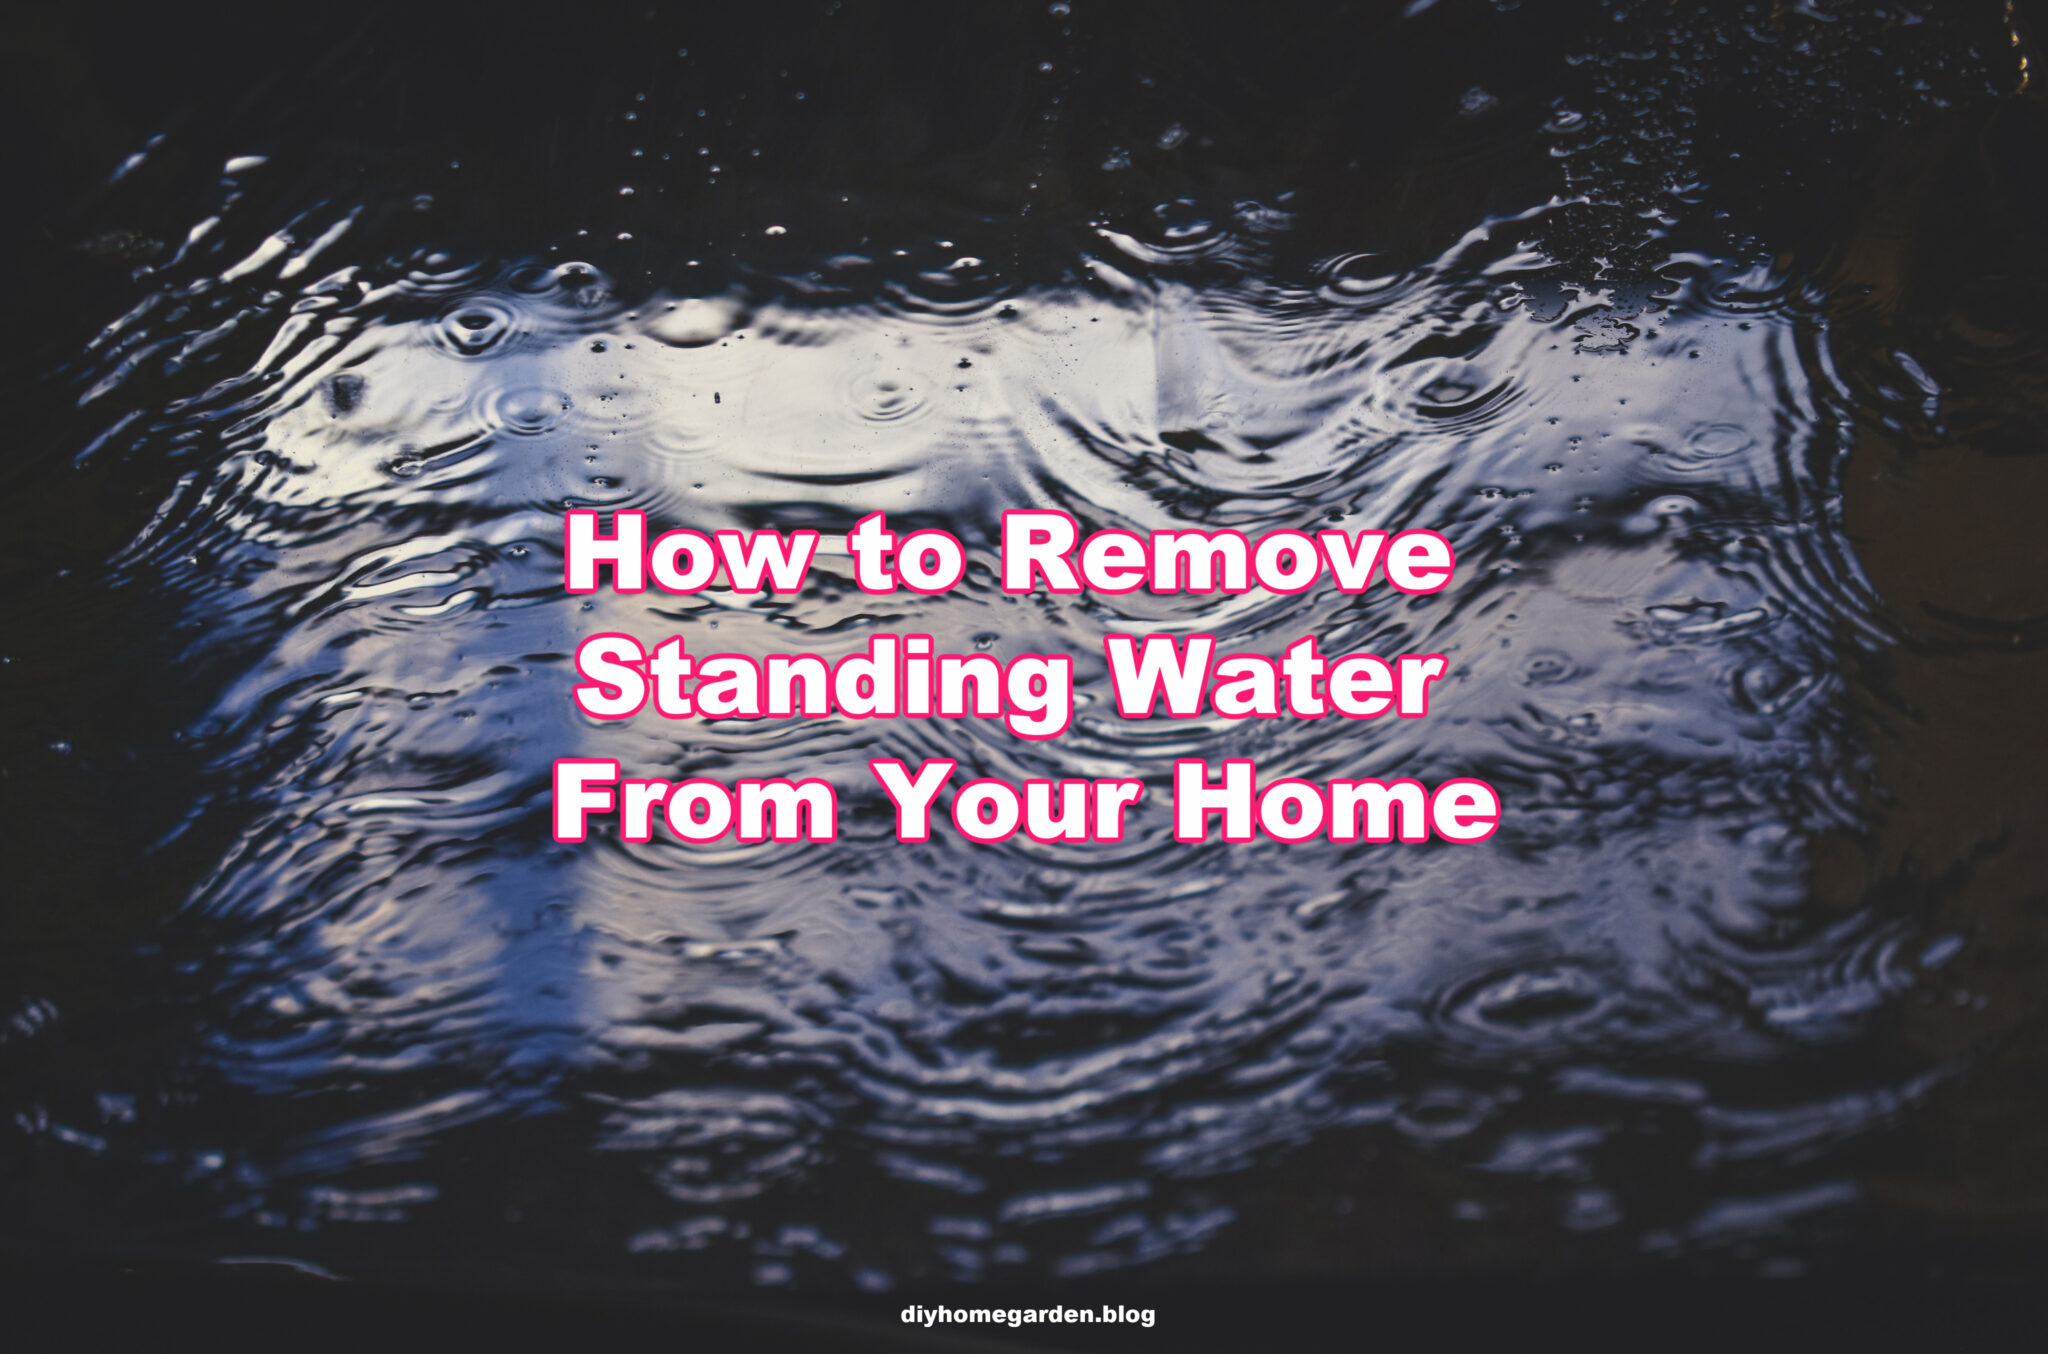 How to Remove Standing Water from Your Home